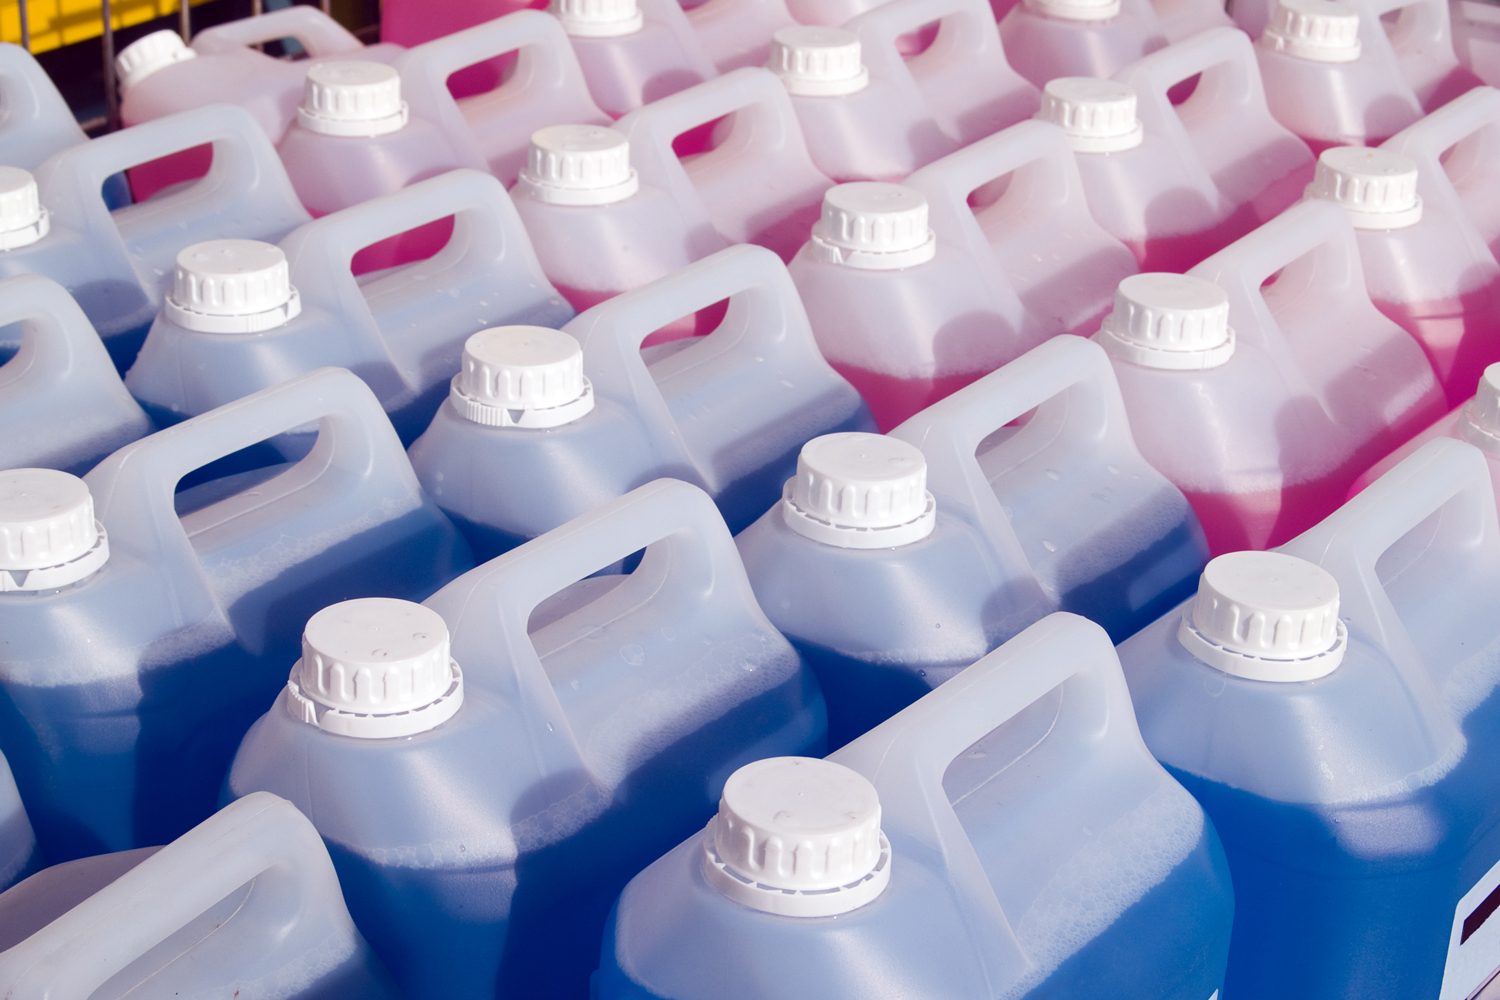 Blue and pink liquids in large plastic bottles with white caps.